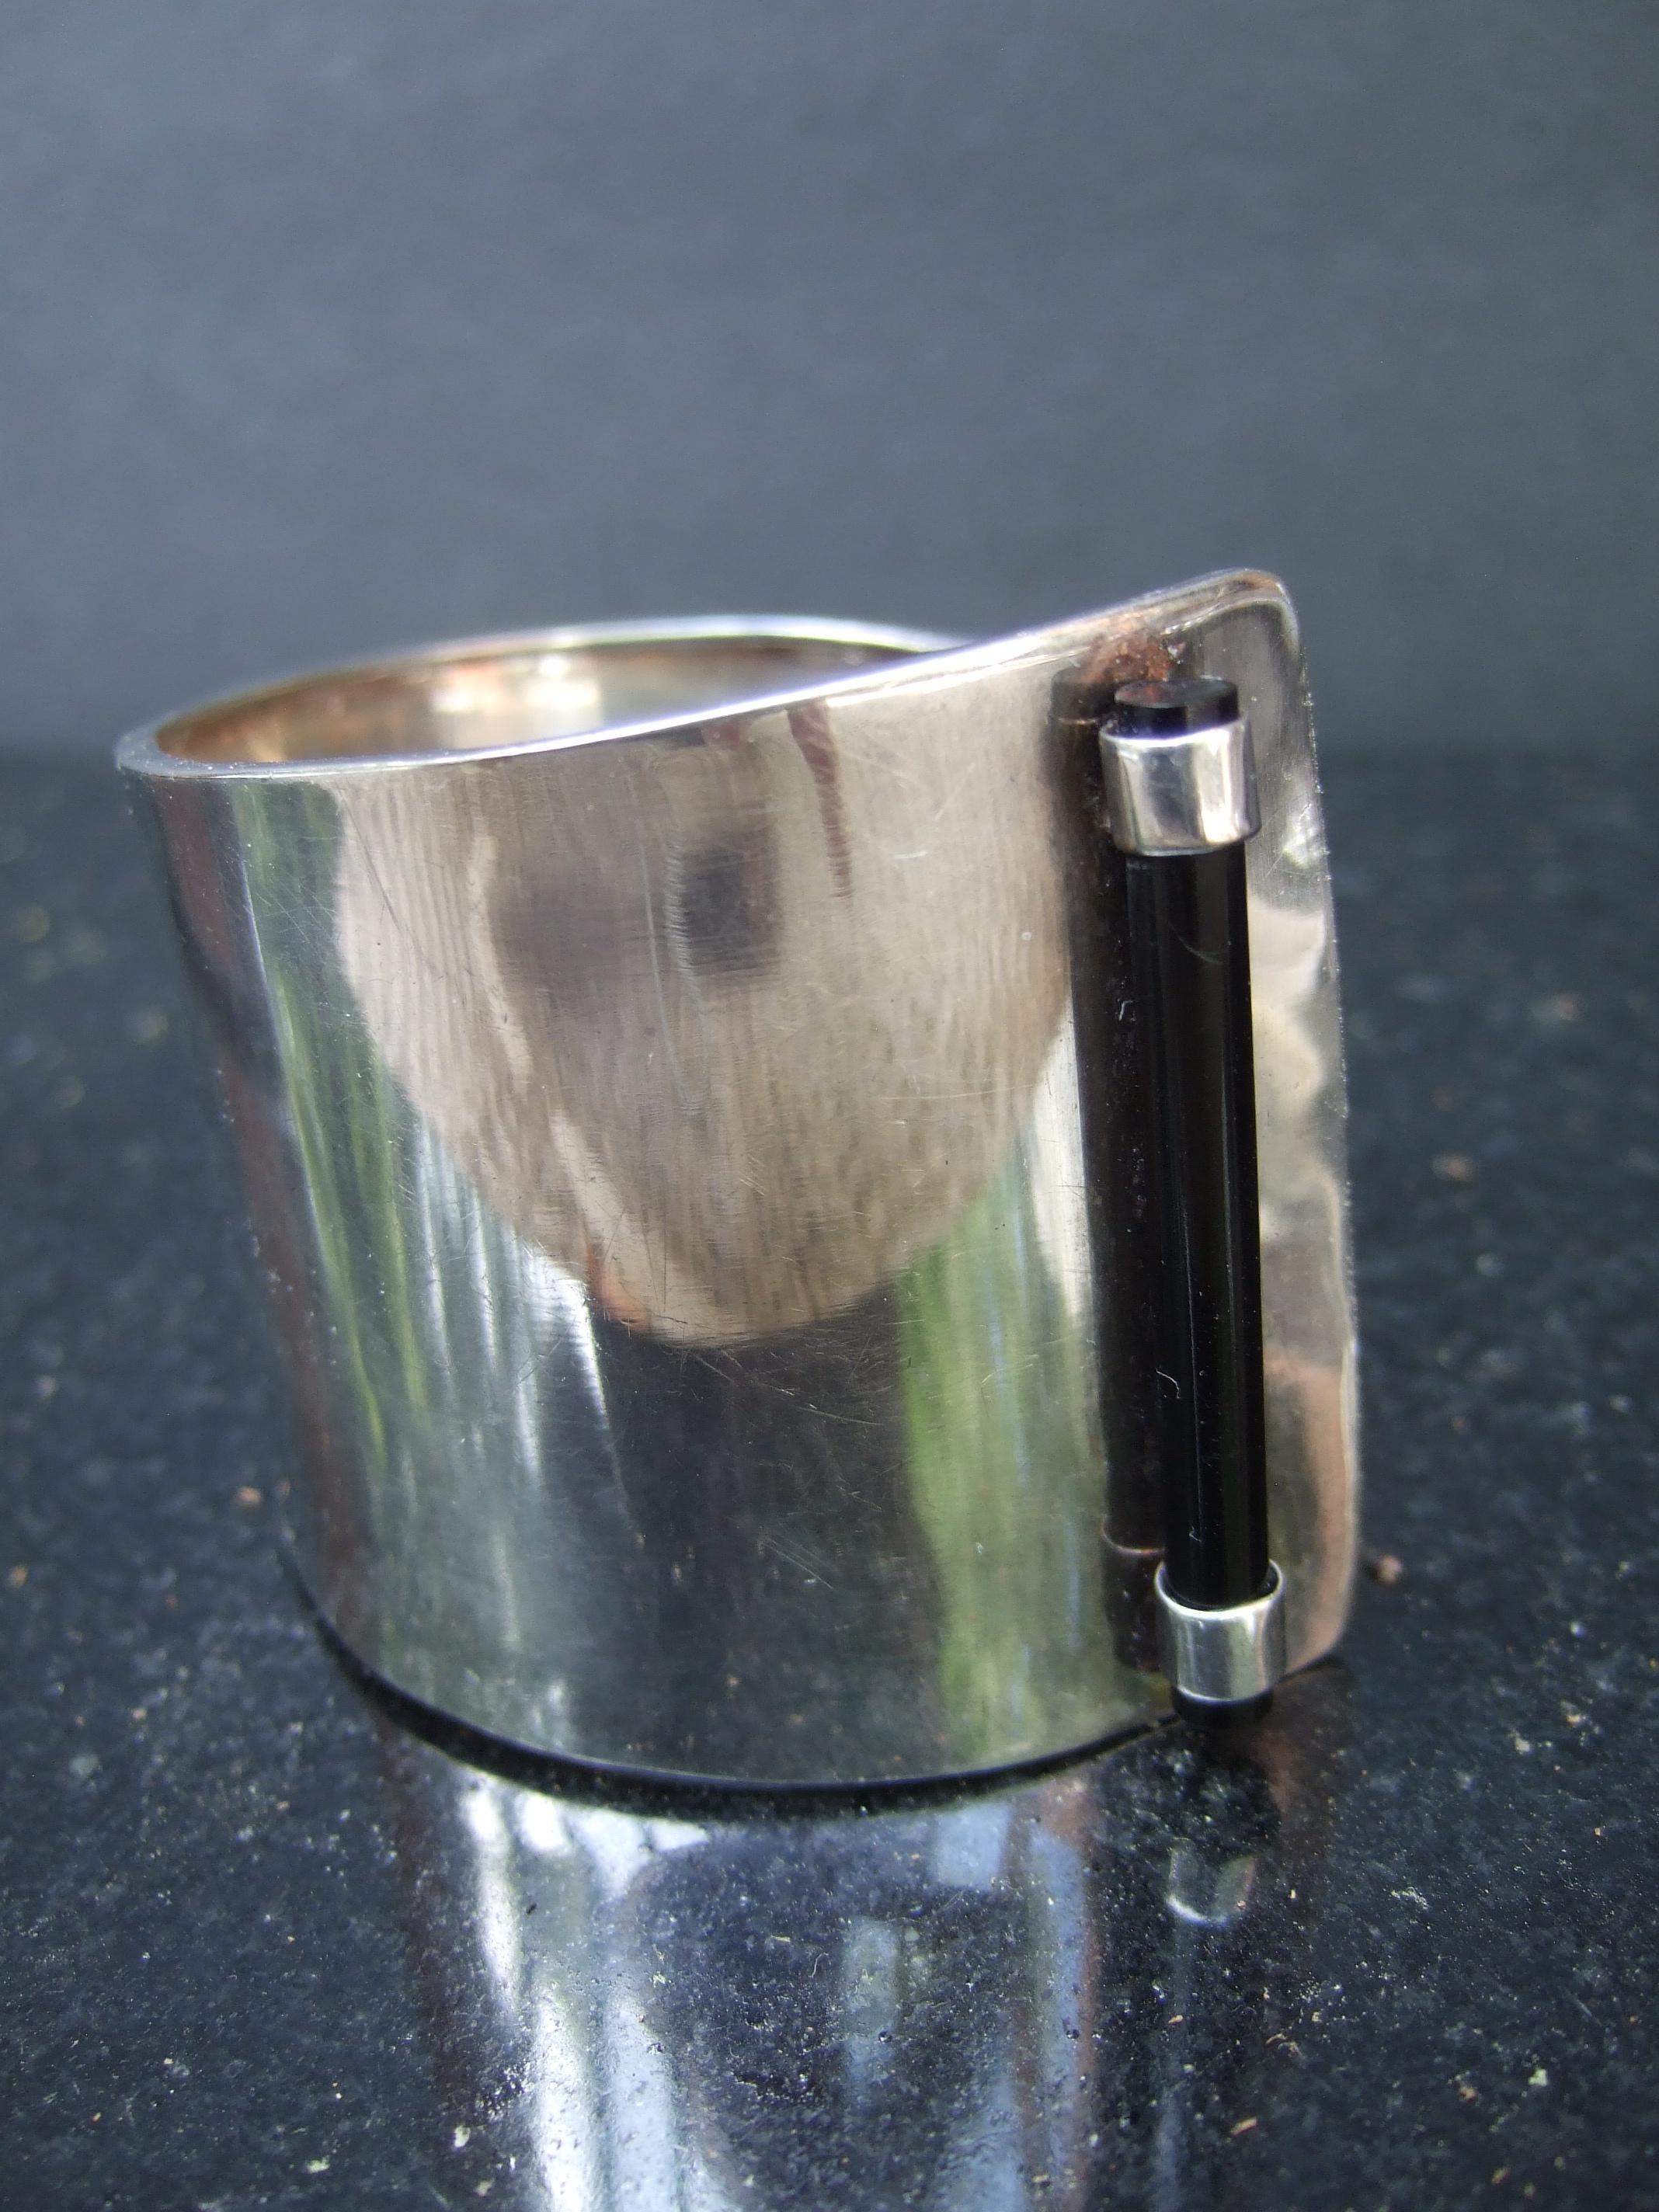 Sterling silver wide handmade artisan cuff bracelet. The unique bracelet is constructed with a wide sterling band that gradually widens on one end. Designed with a thin black lucite cylinder rod soldered on the widest end.
The severe bold unisex